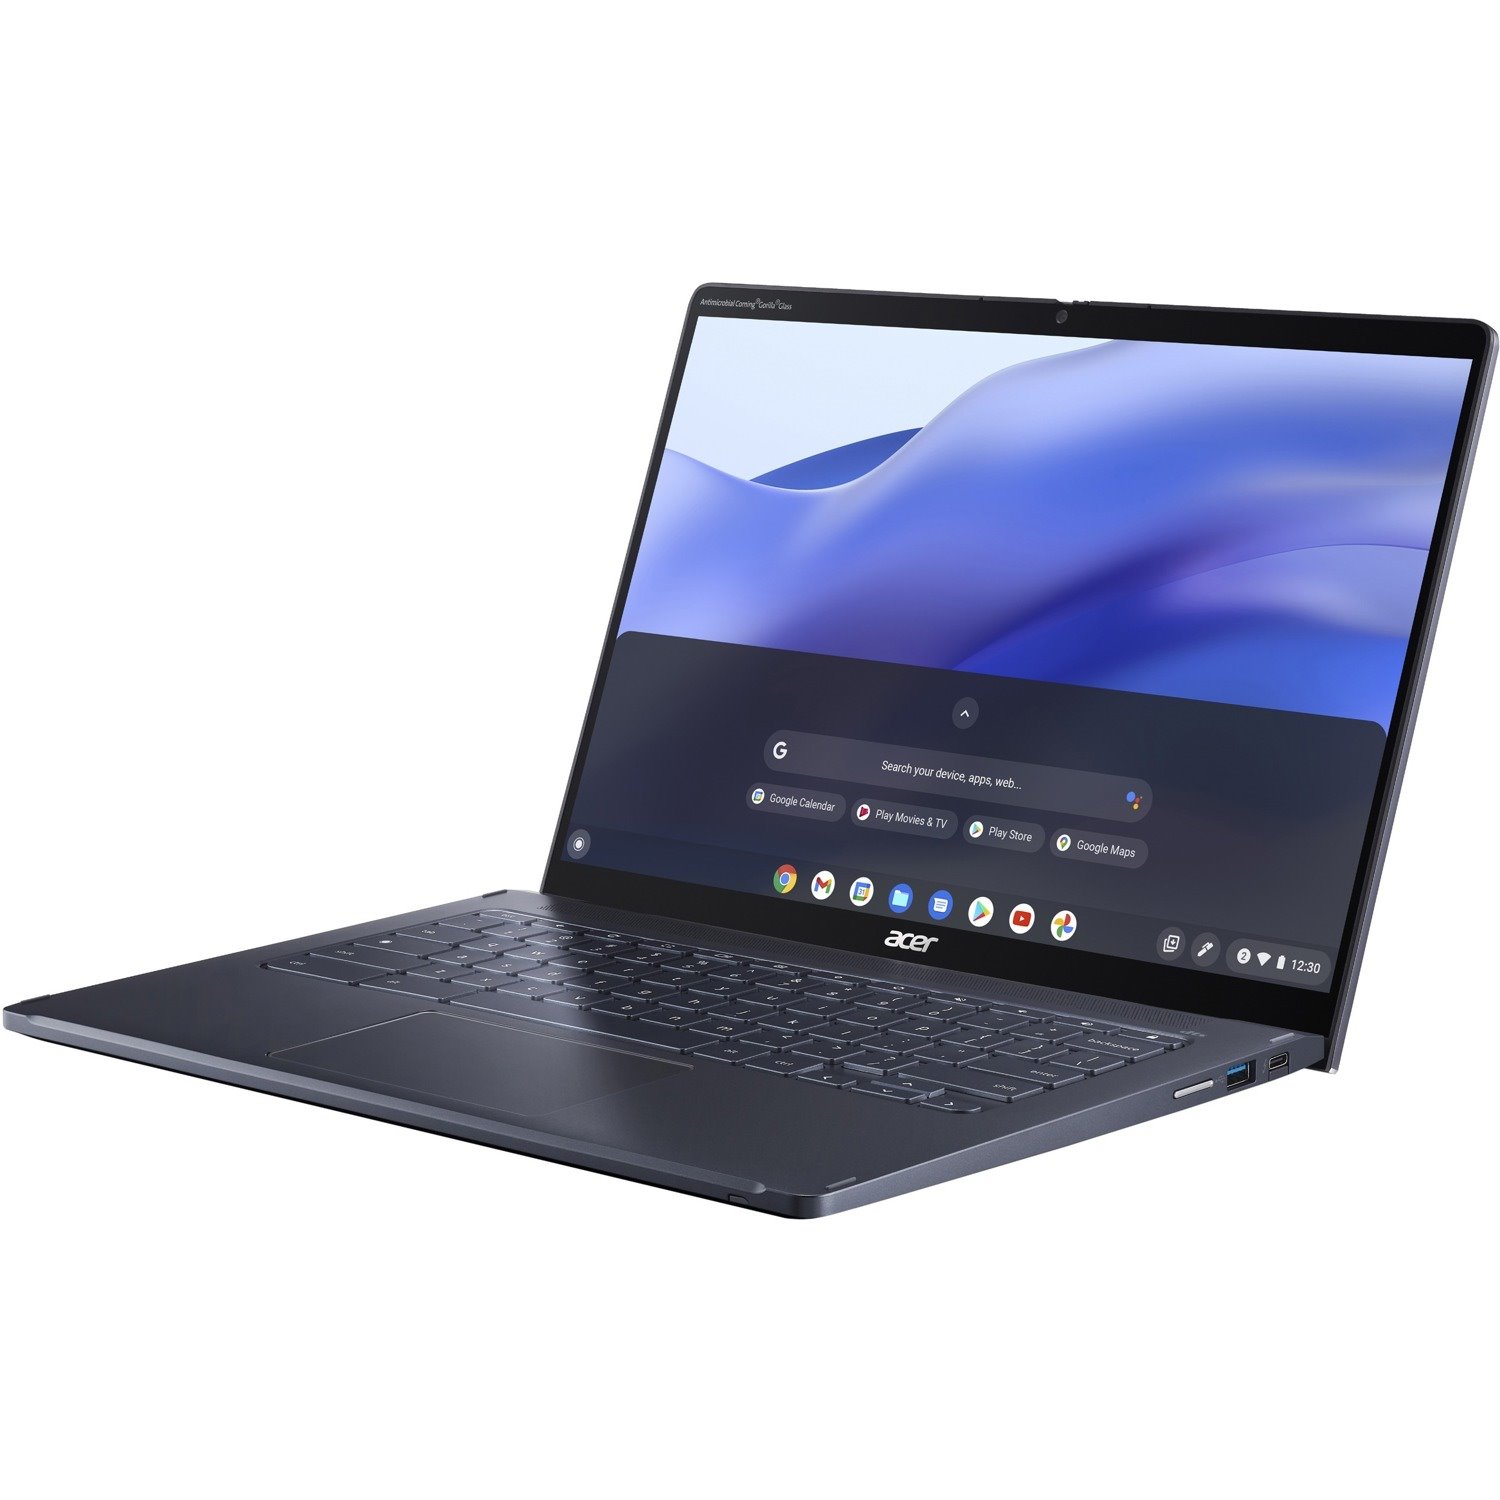 Acer Chromebook Spin 714 CP714-1WN CP714-1WN-79H0 14" Touchscreen Convertible 2 in 1 Chromebook - WUXGA - 1920 x 1200 - Intel Core i7 12th Gen i7-1260P Dodeca-core (12 Core) 2.10 GHz - 16 GB Total RAM - 256 GB SSD - Steel Gray